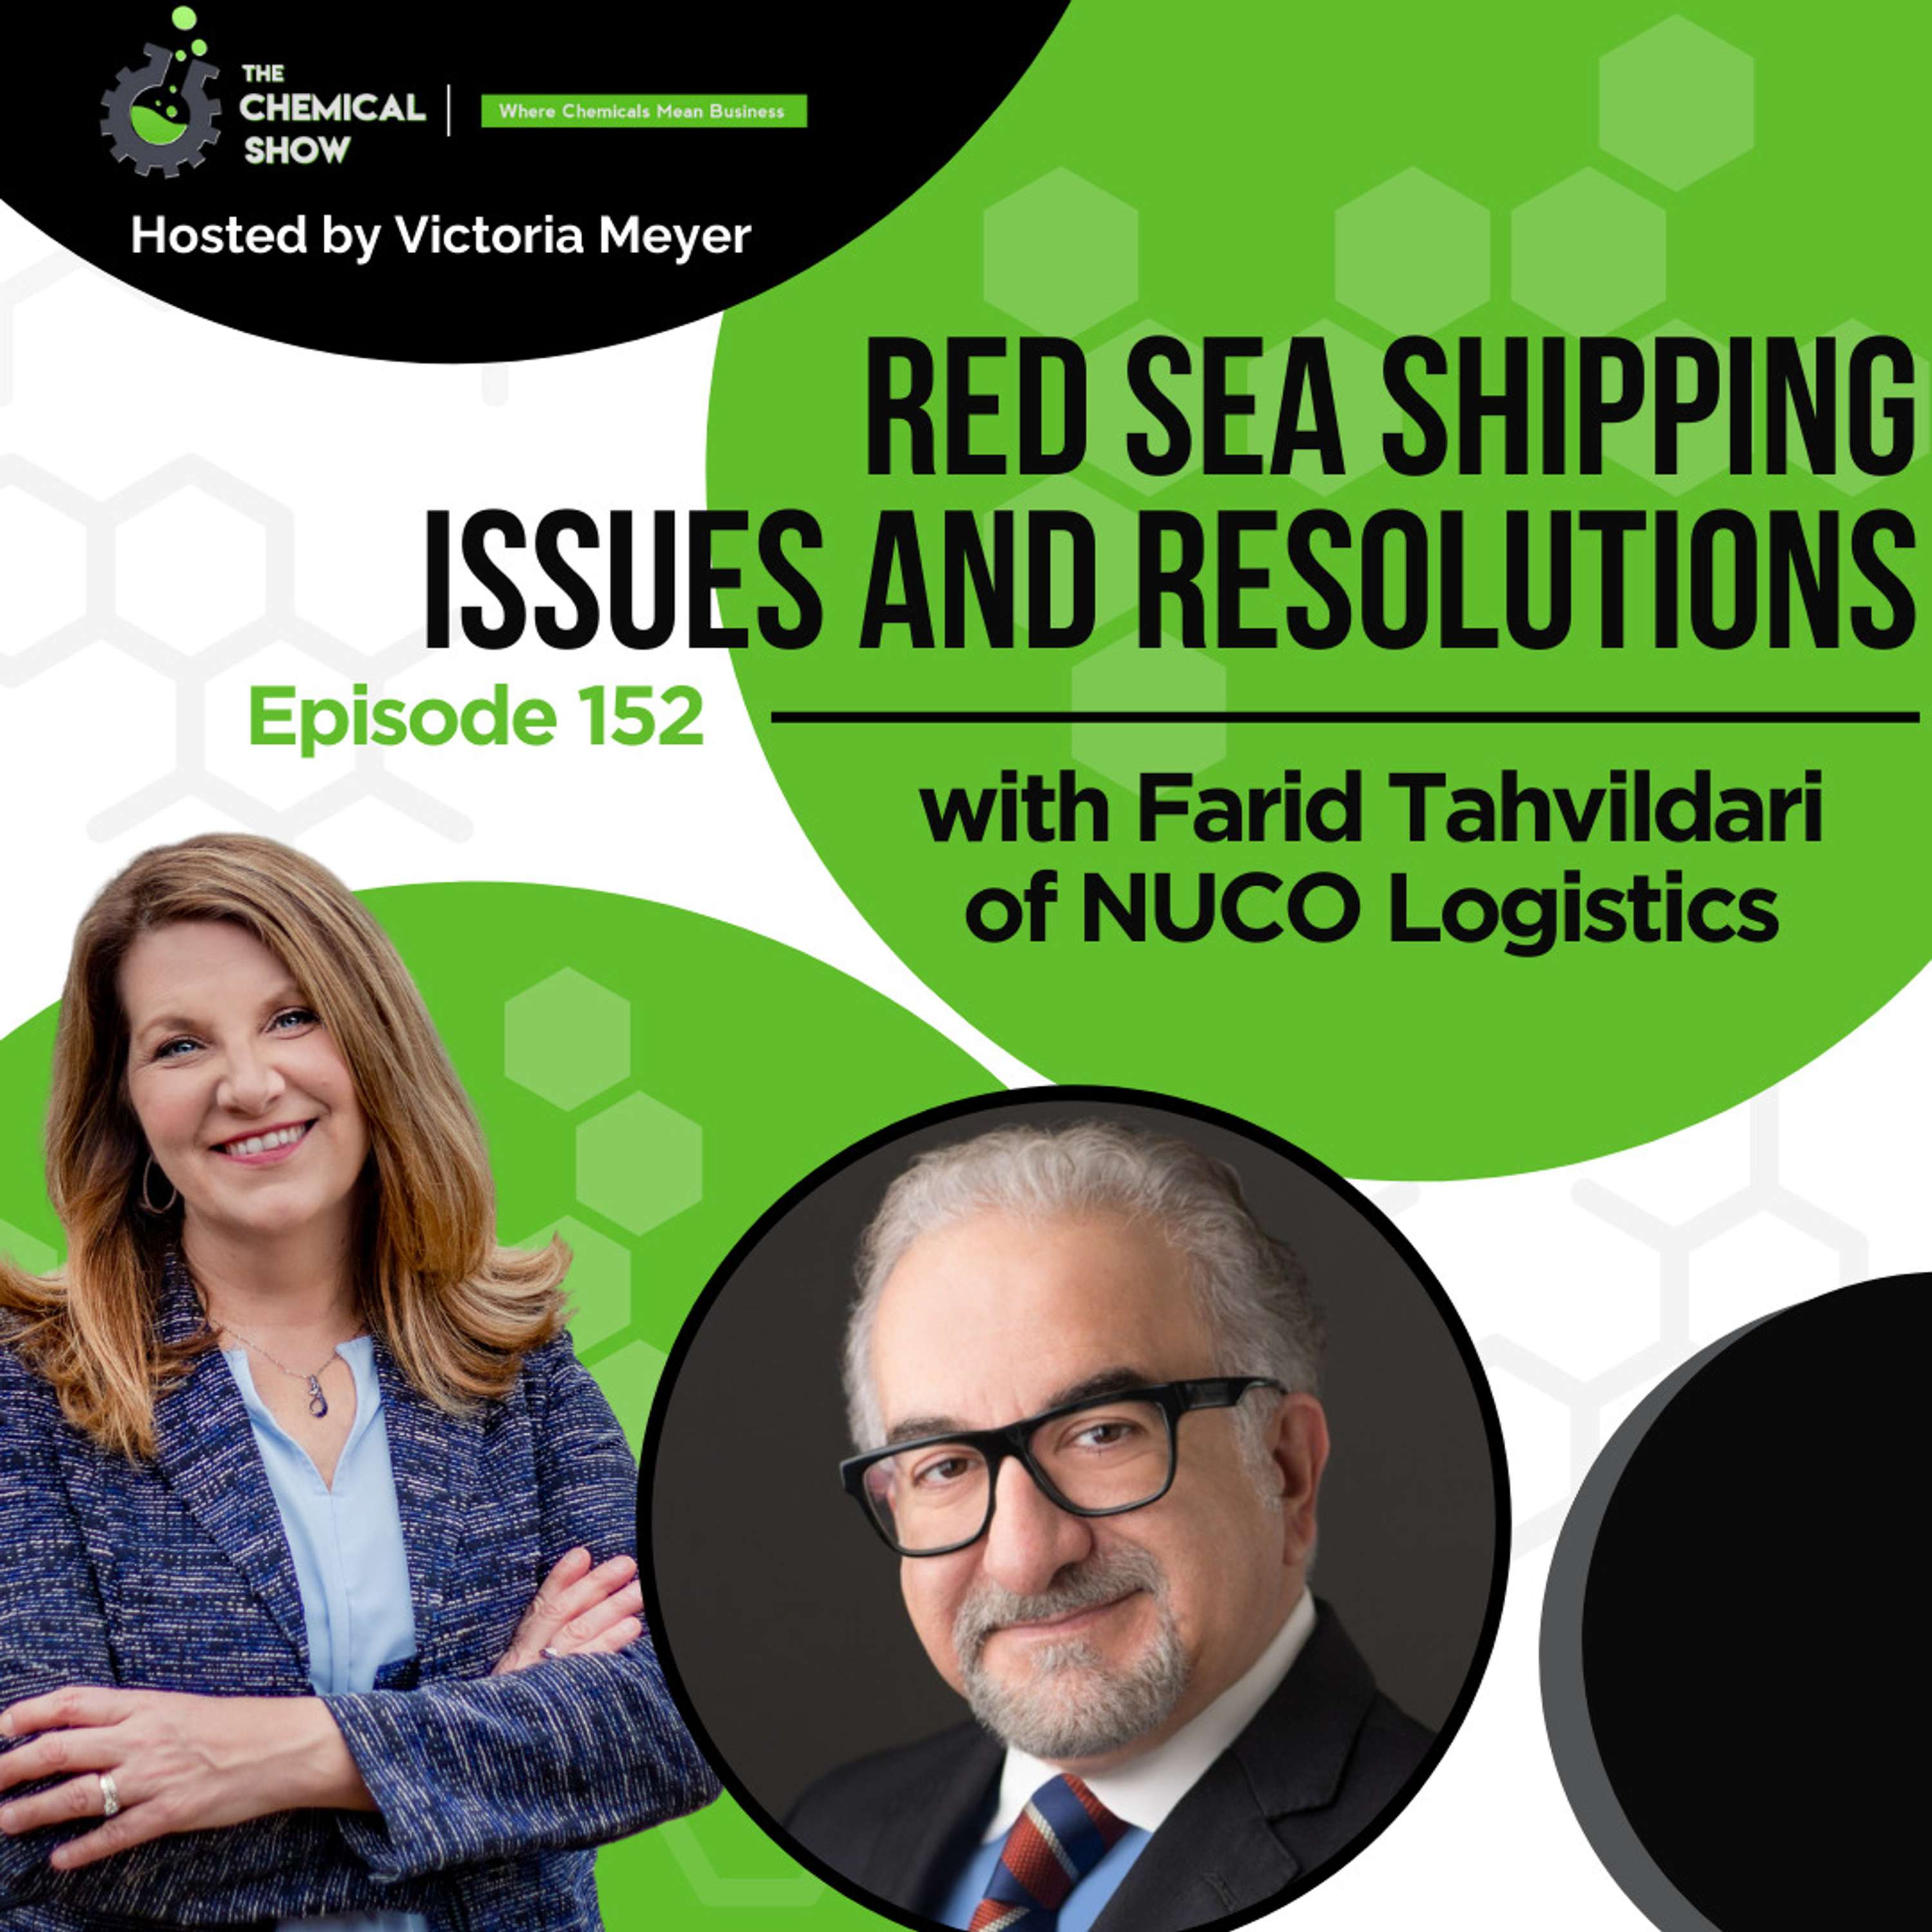 Red Sea Shipping Issues and Resolutions with Farid Tahvildari of NUCO Logistics - Ep 152